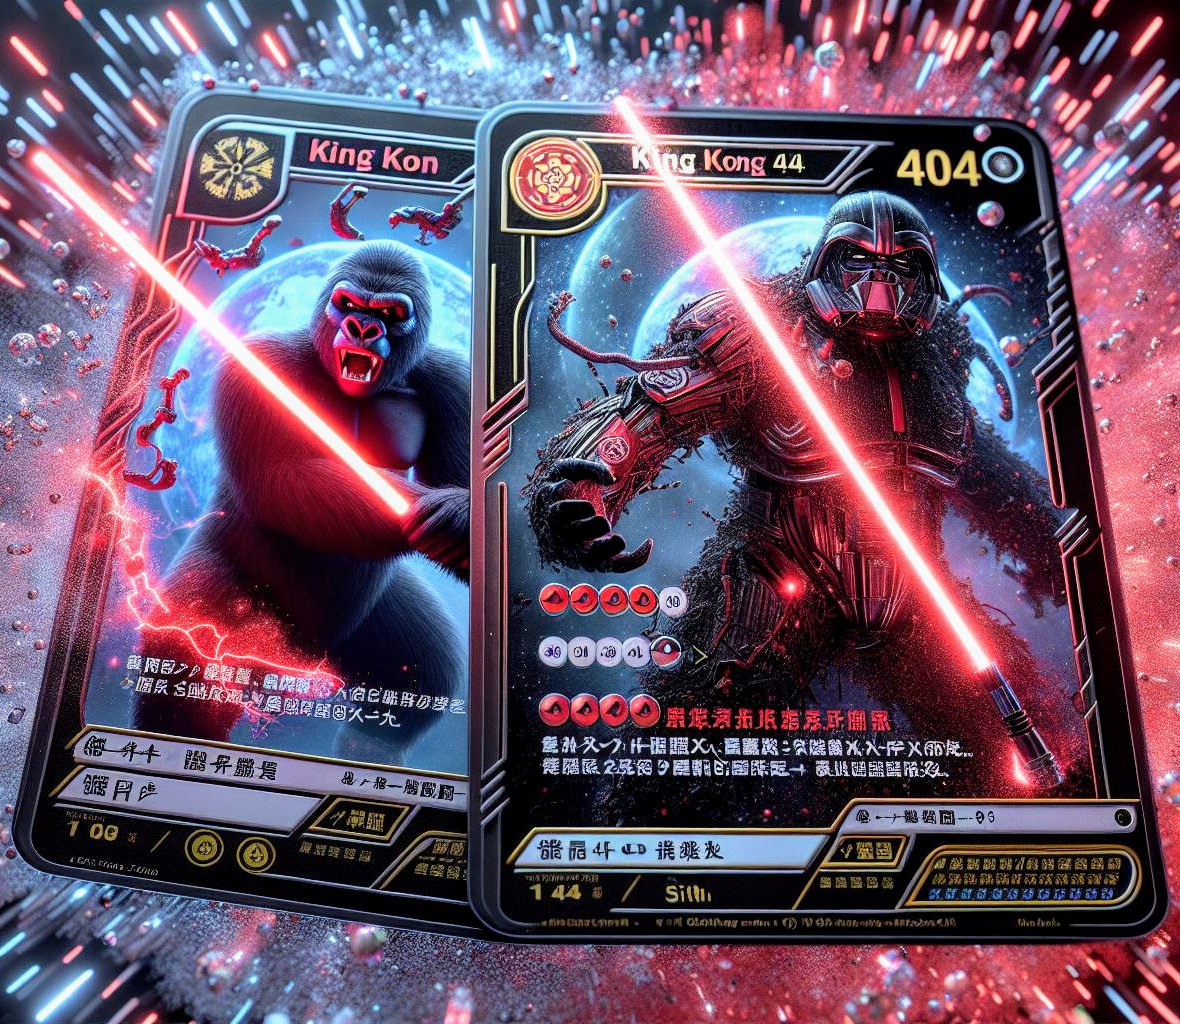 ❤️ It might be true to say that many people love Star Wars ❤️
🦍 $KONG definitely loves Star Wars 💥
🦍 $KONG Cards ♦️❤️♠️
💥Let me know what you think of this one in the comments💥
Repost✨
Follow 💫
♥️➕💬
#LongTheKong #IAmKong #MemeCoinSeason @KONGavax #Memecoin2024 #Ethererum